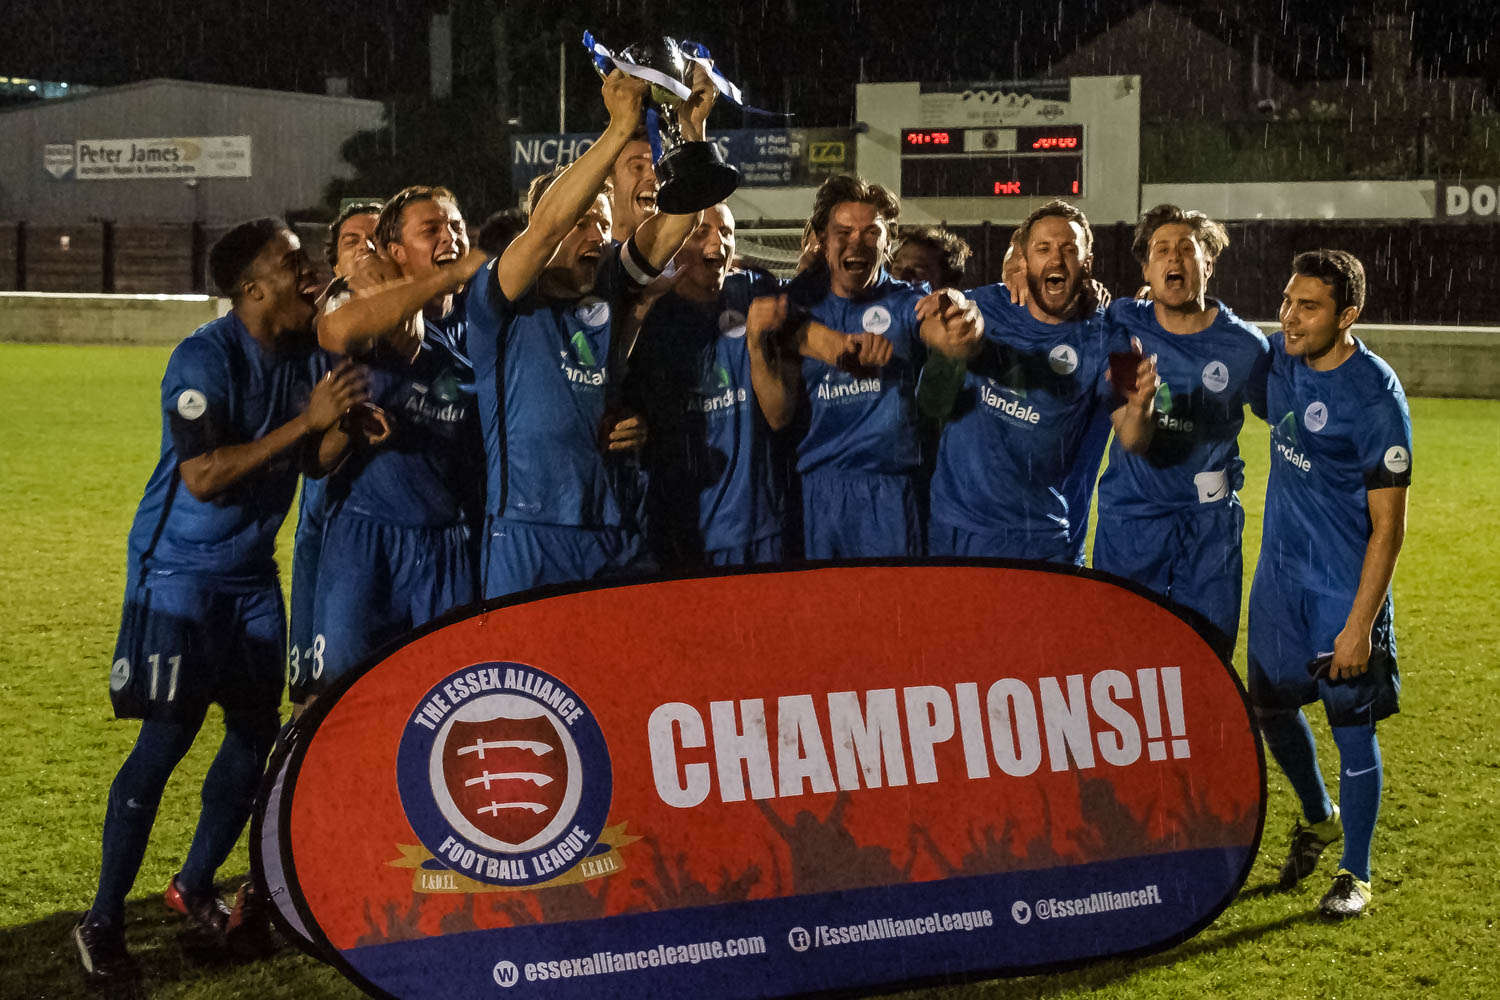 Old Esthameians snatch Premier Division Cup in shootout drama